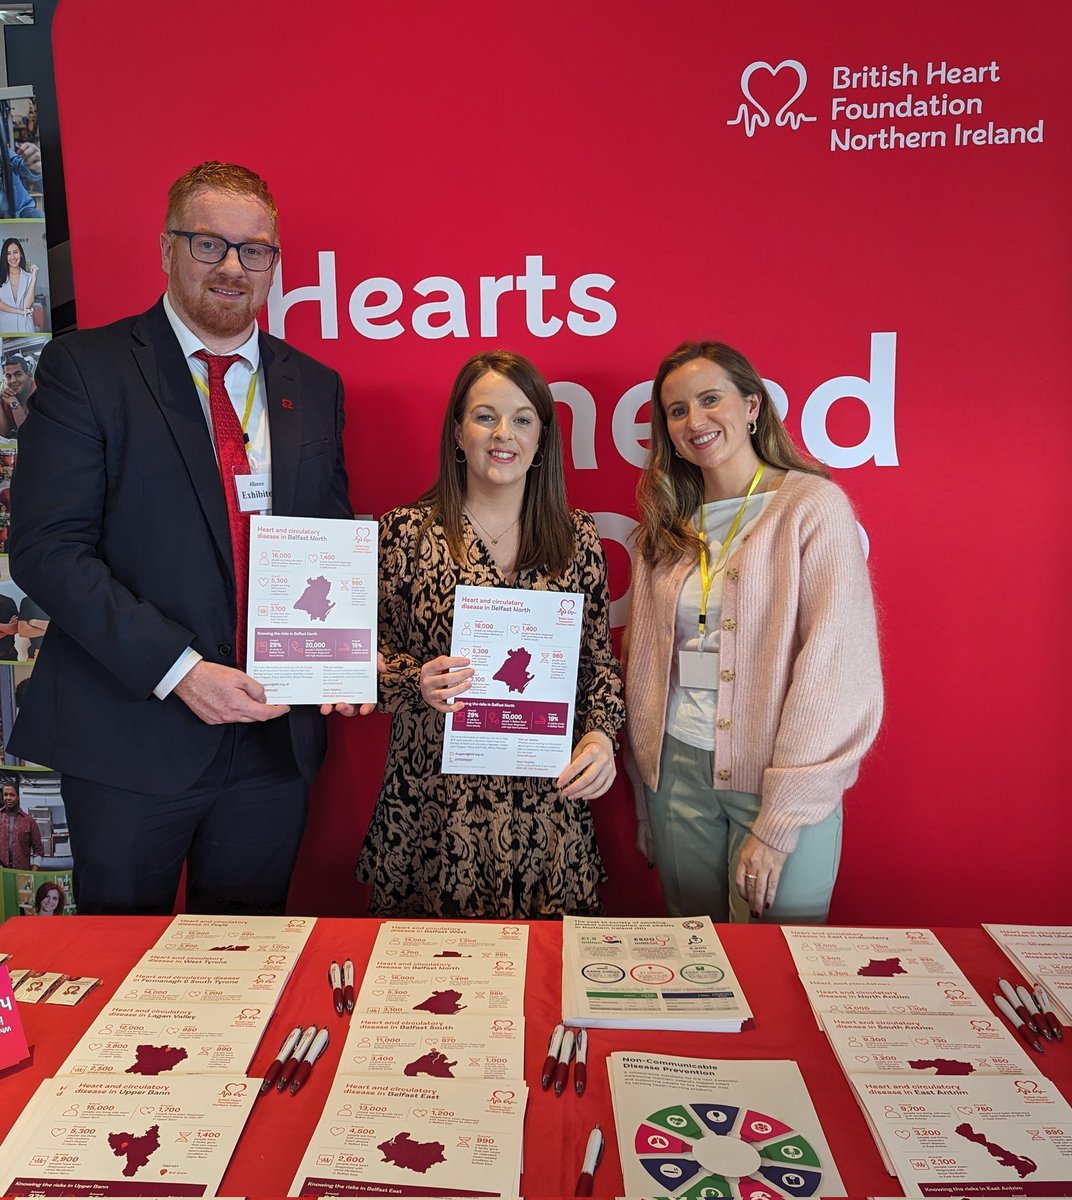 @dhoneyford @PMcReynoldsMLA Thanks to @DannyDonnelly1 and @NualaMcAllister for calling at our stall and discussing the heart attack gender gap, pressures on services and the need for long term investment and prevention.